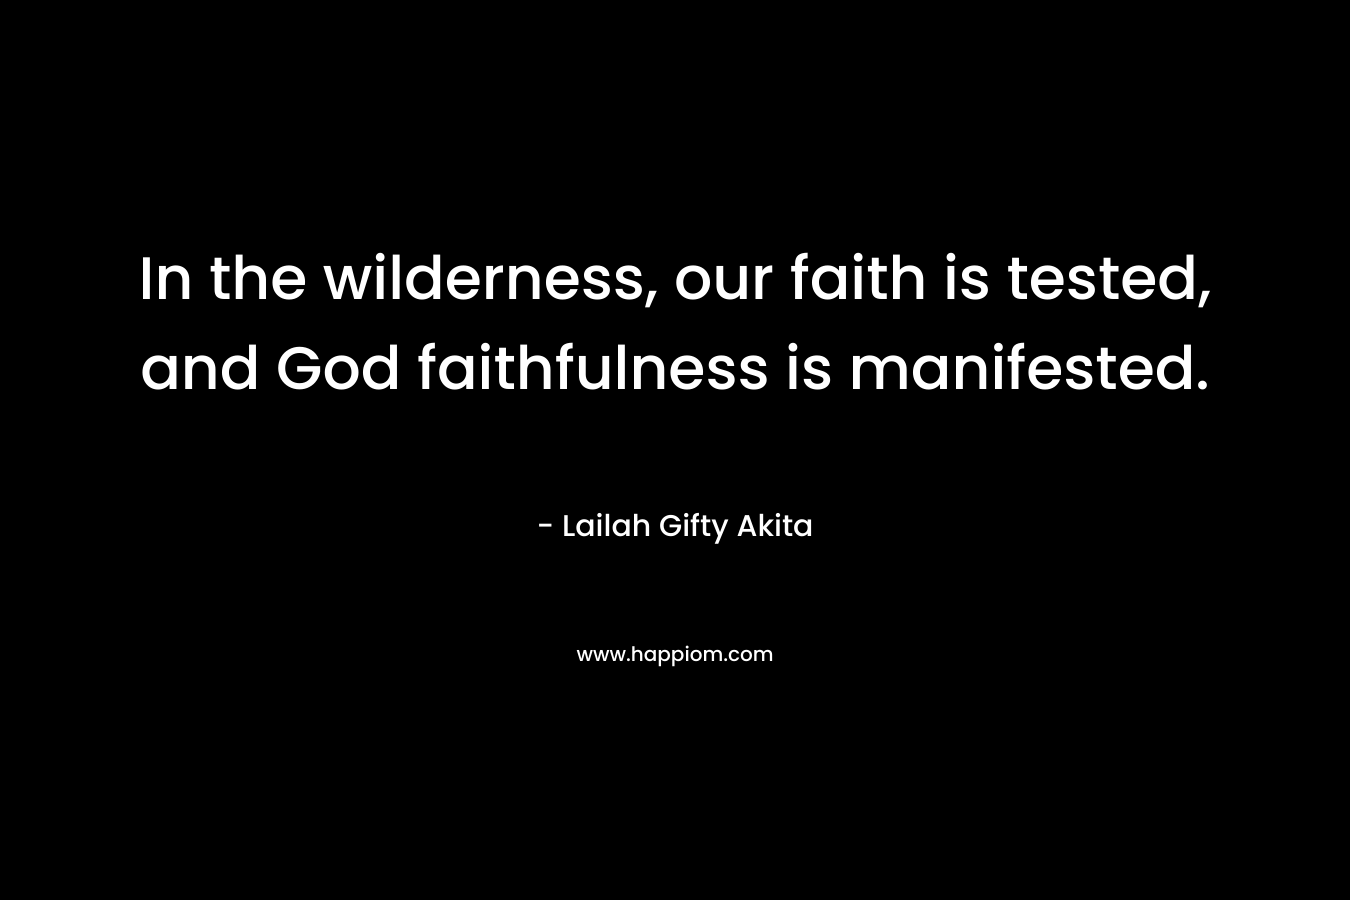 In the wilderness, our faith is tested, and God faithfulness is manifested.